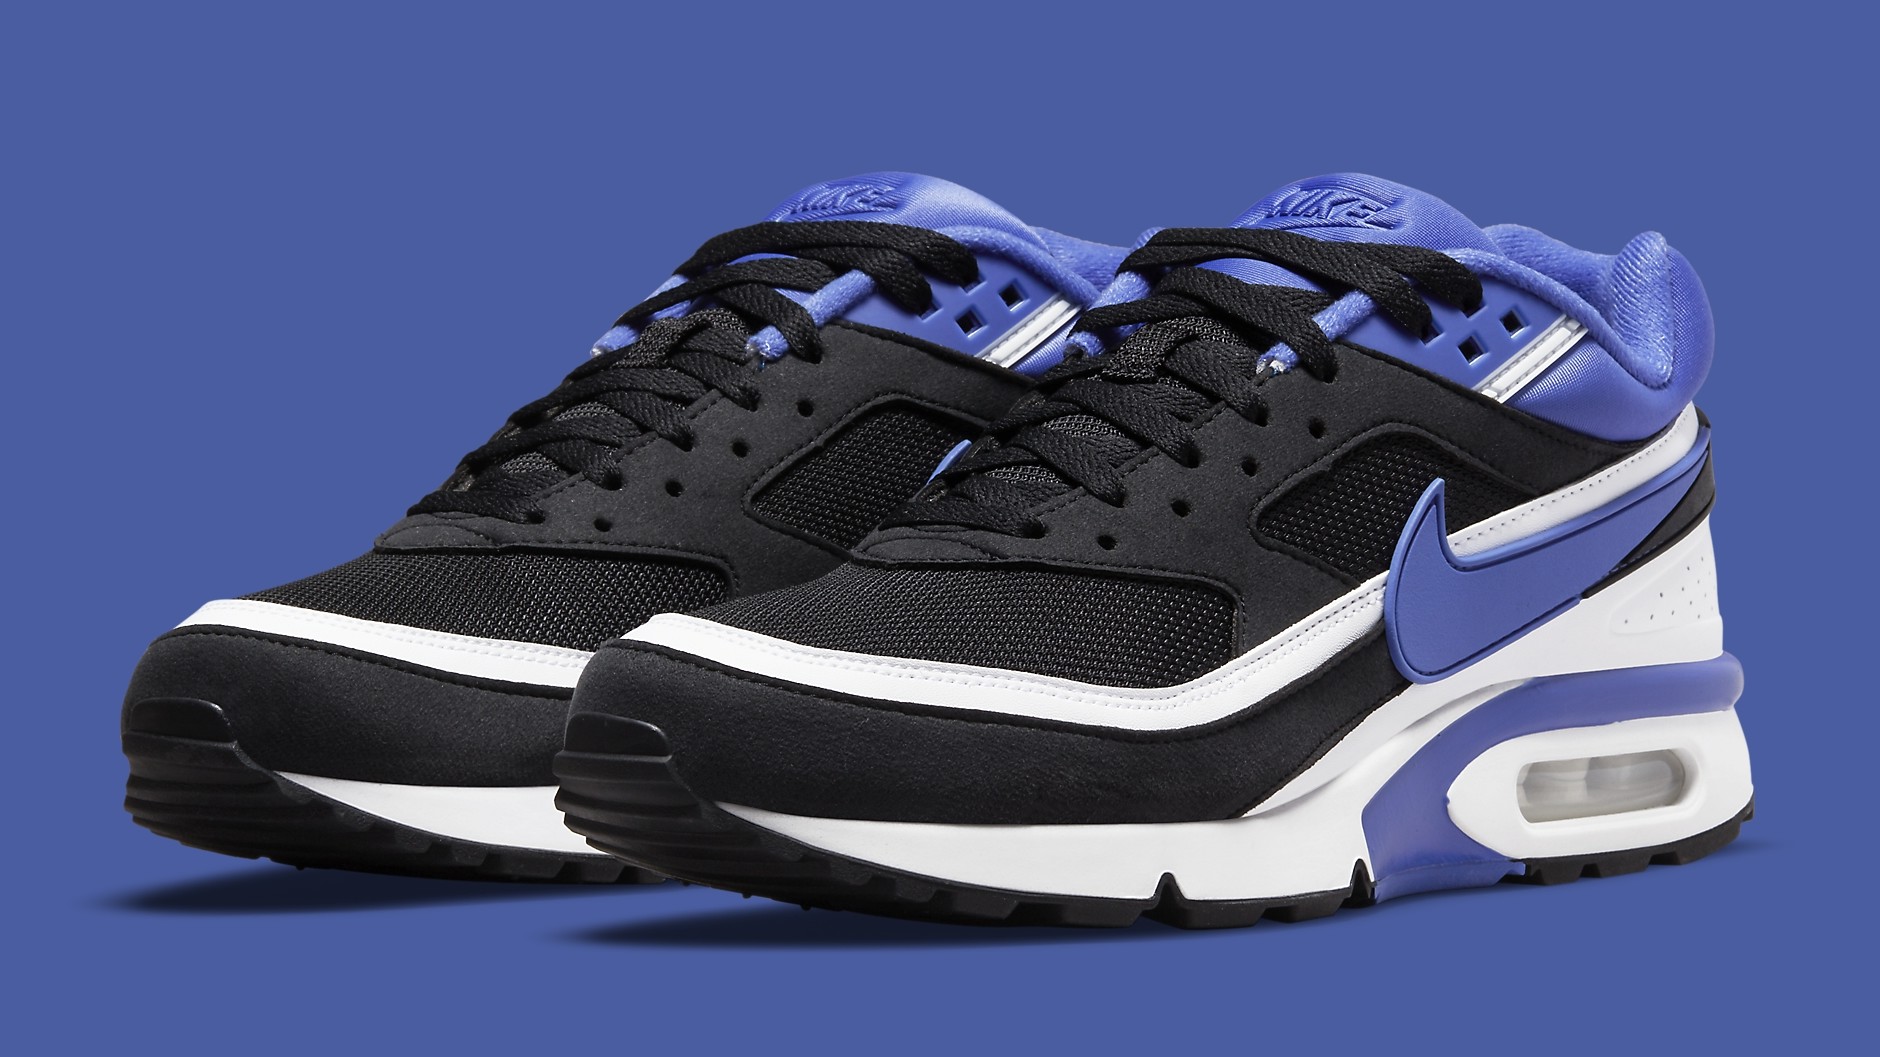 Air Max BW 'Persian Violet' Release Date DJ6124-001​​​​​​​ | Sole Collector